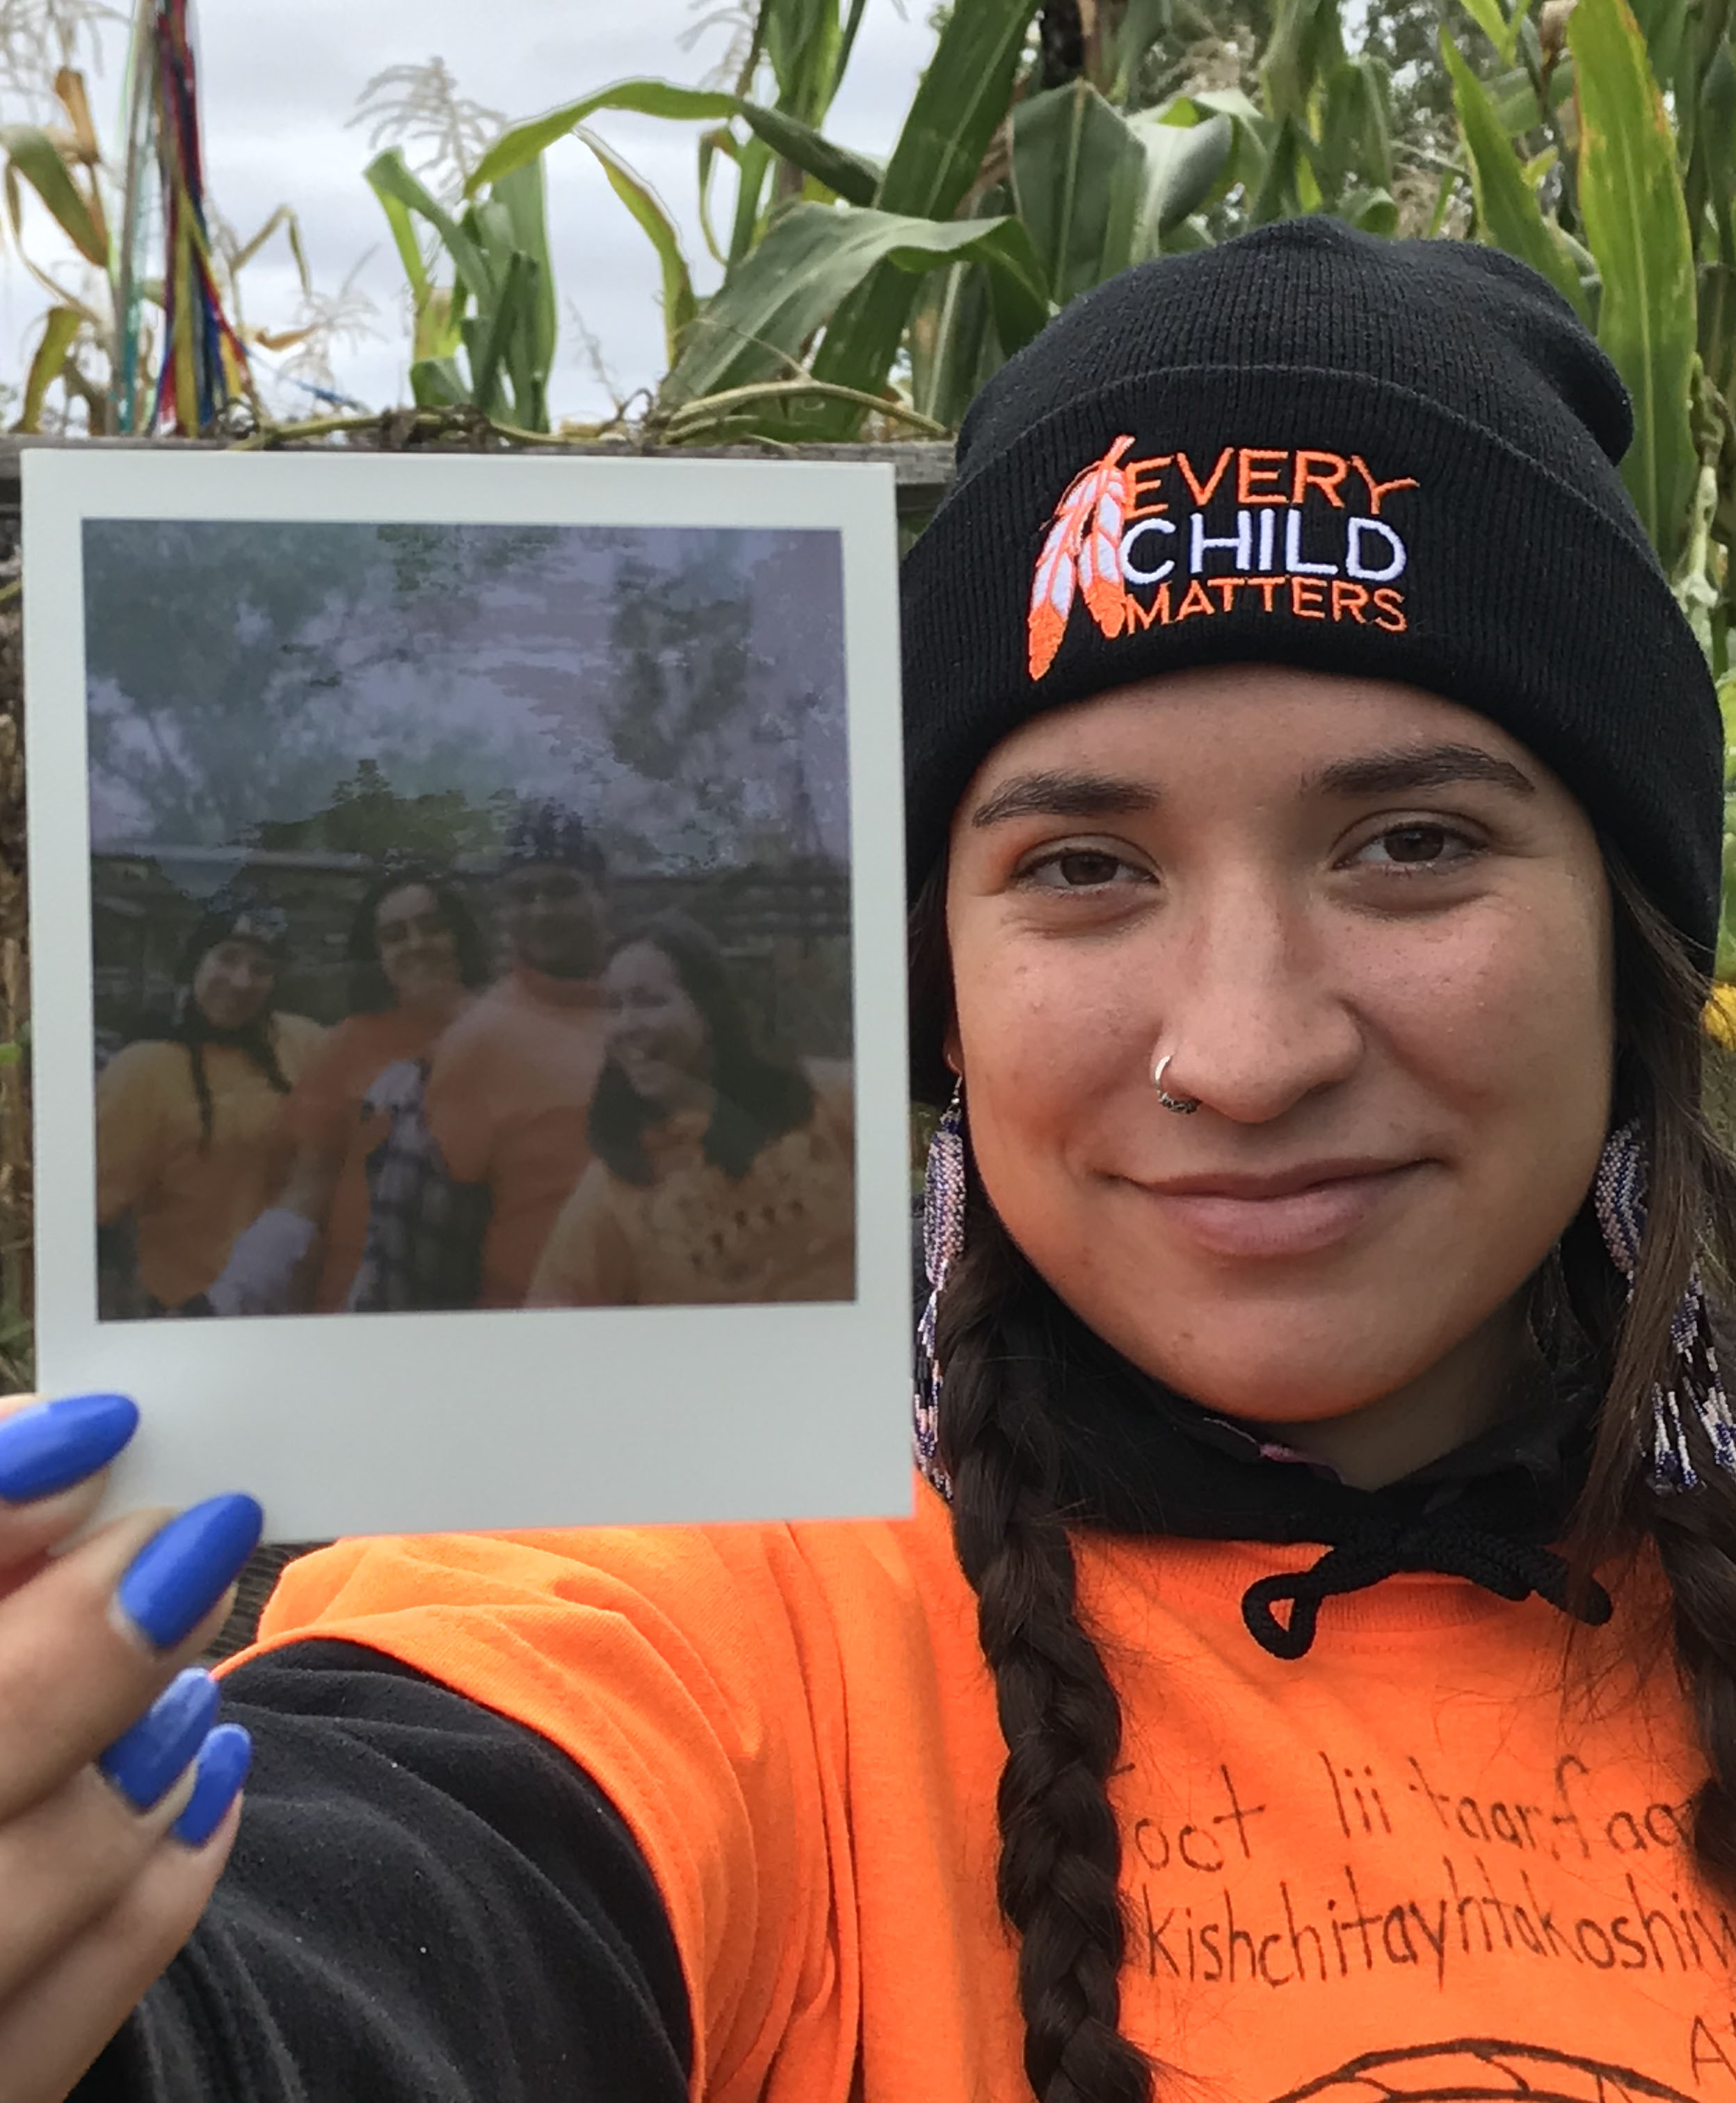 Alexis Bornyk, a young woman with long braided dark hair wearing an "every child matters" hat and orange shirt, holding a polaroid picture from an event at UTSC campus farm